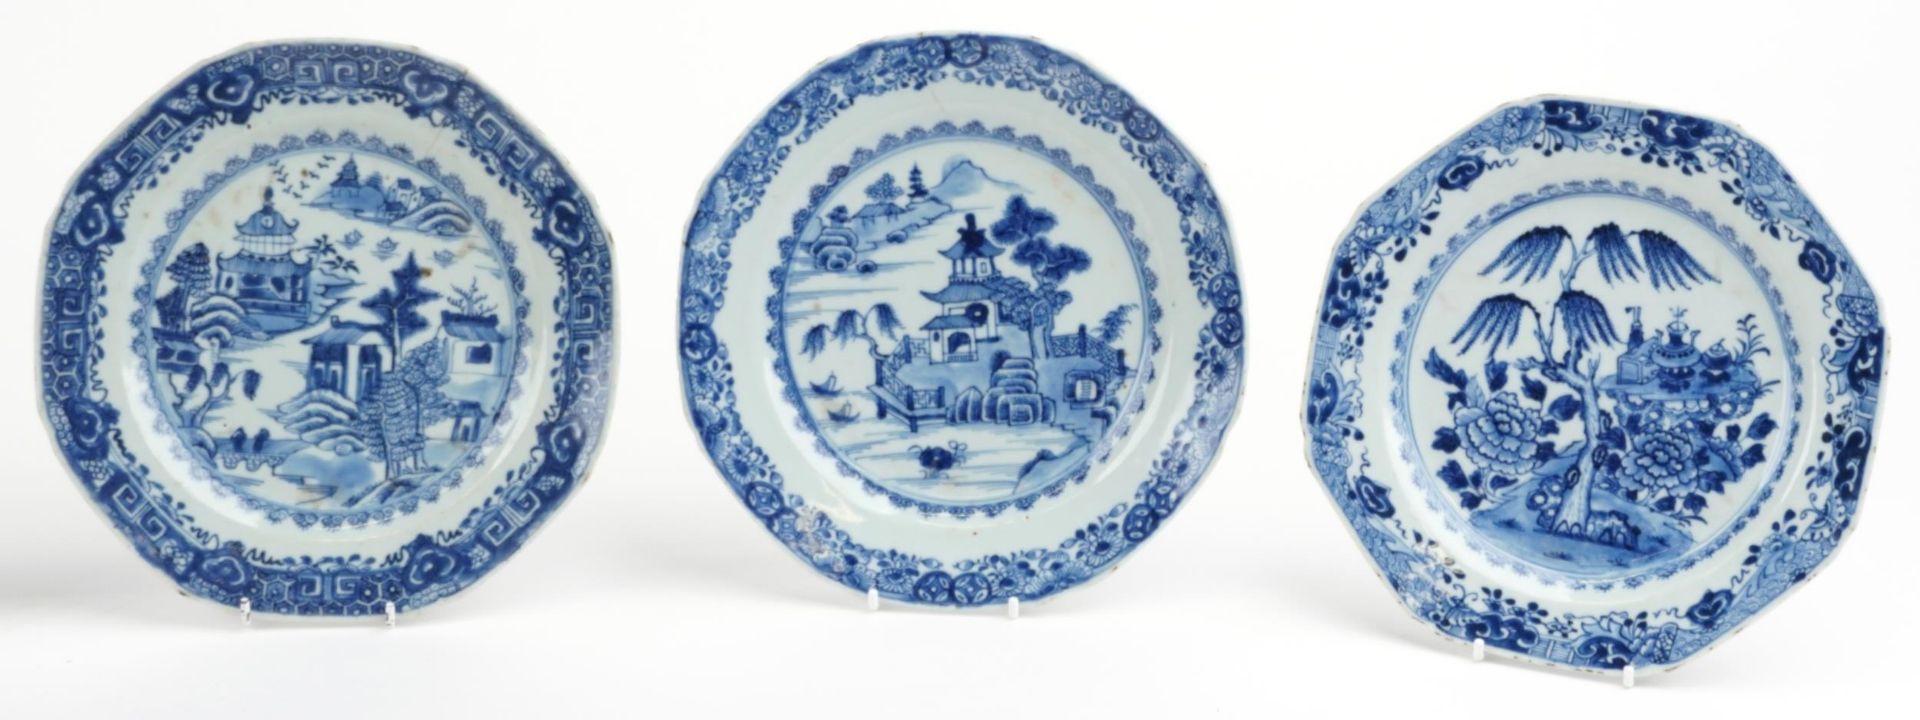 Six Chinese blue and white porcelain plates hand painted with river landscapes and flowers, each - Image 3 of 6